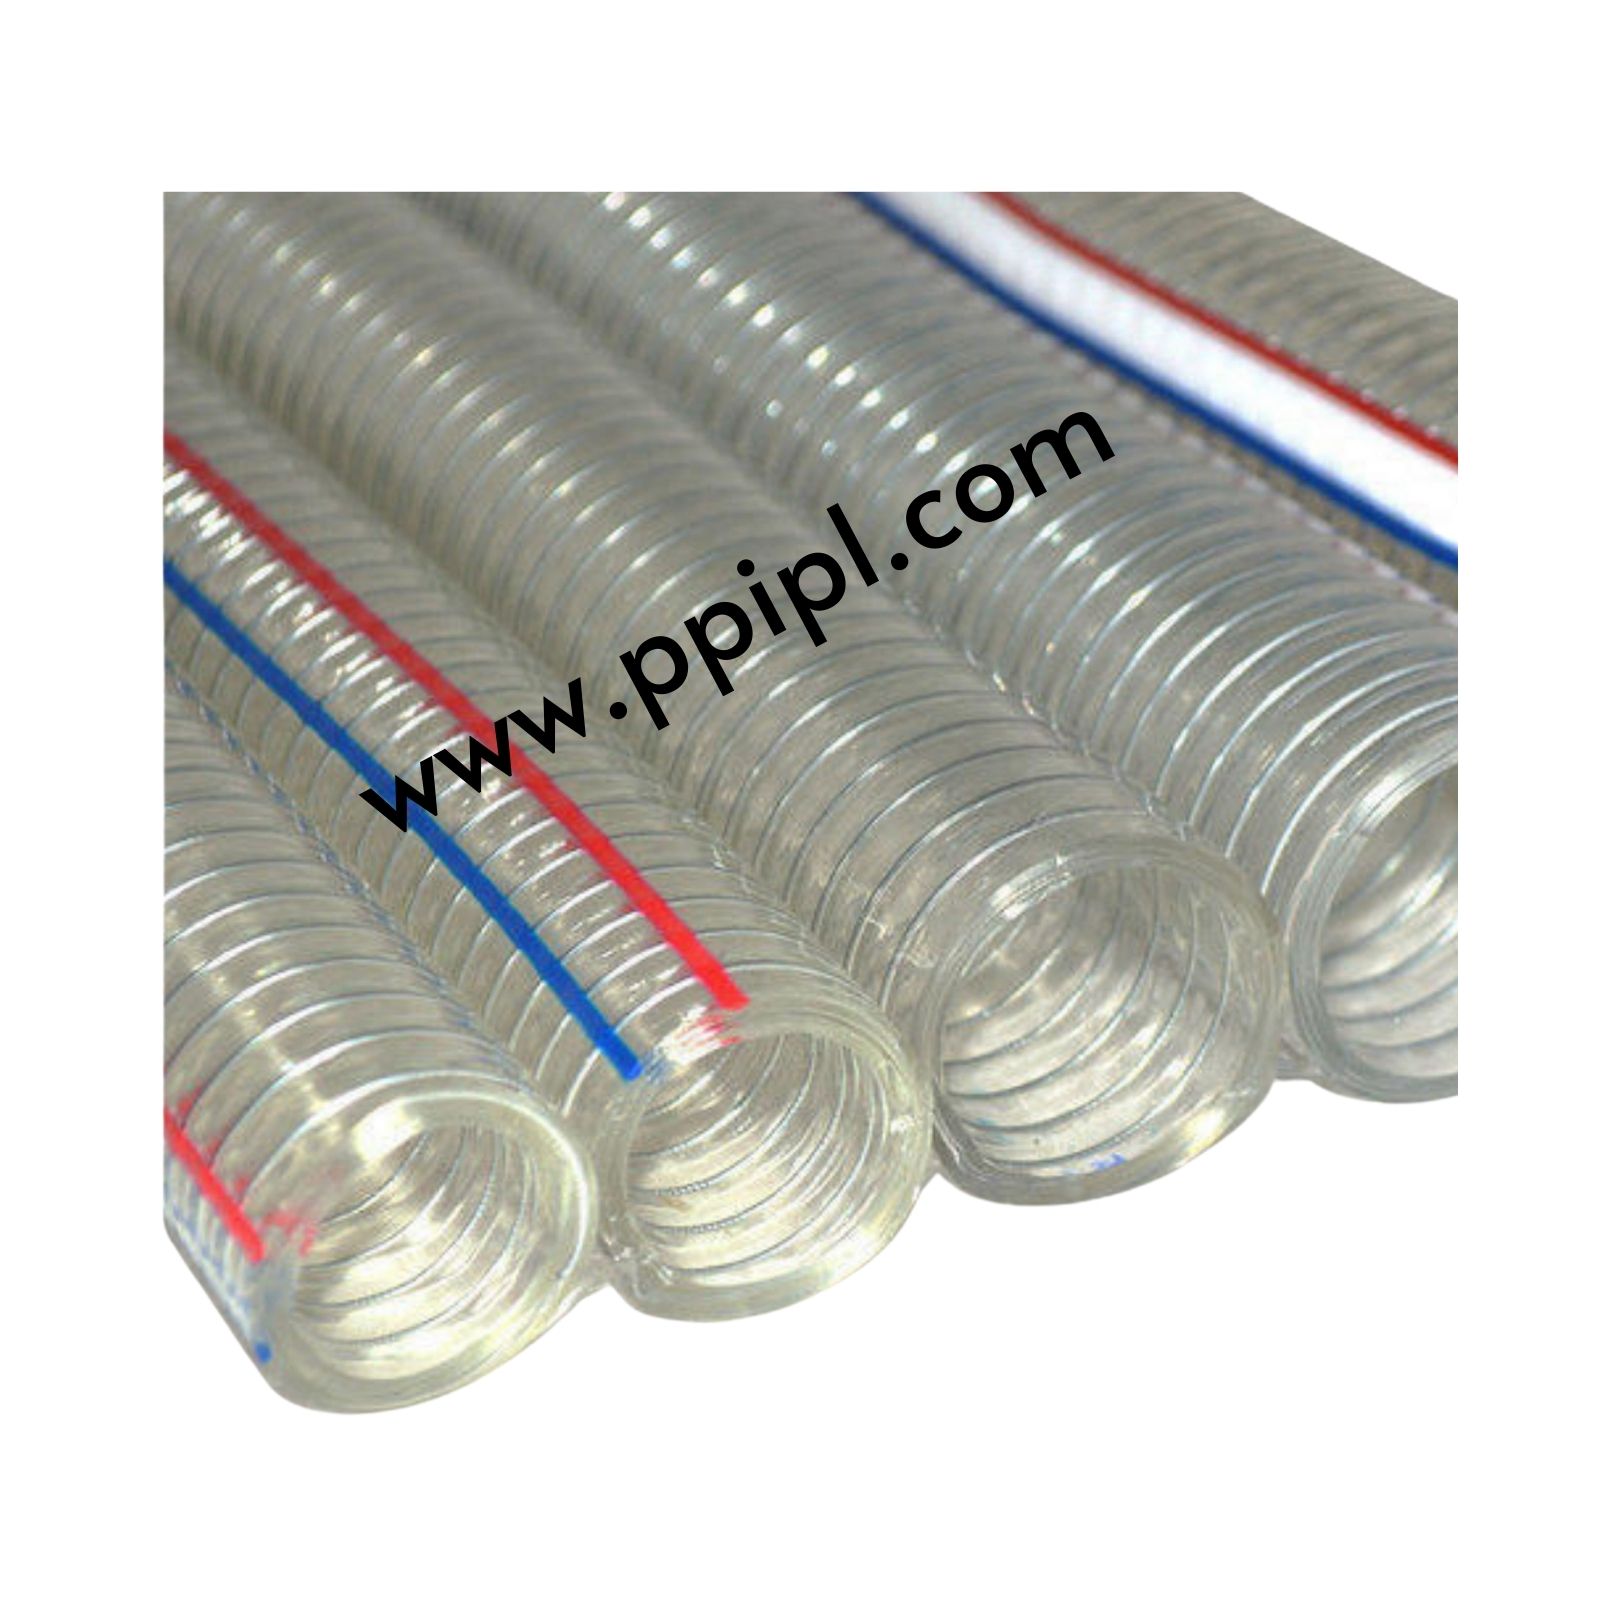 PVC PIPES AND HOSES